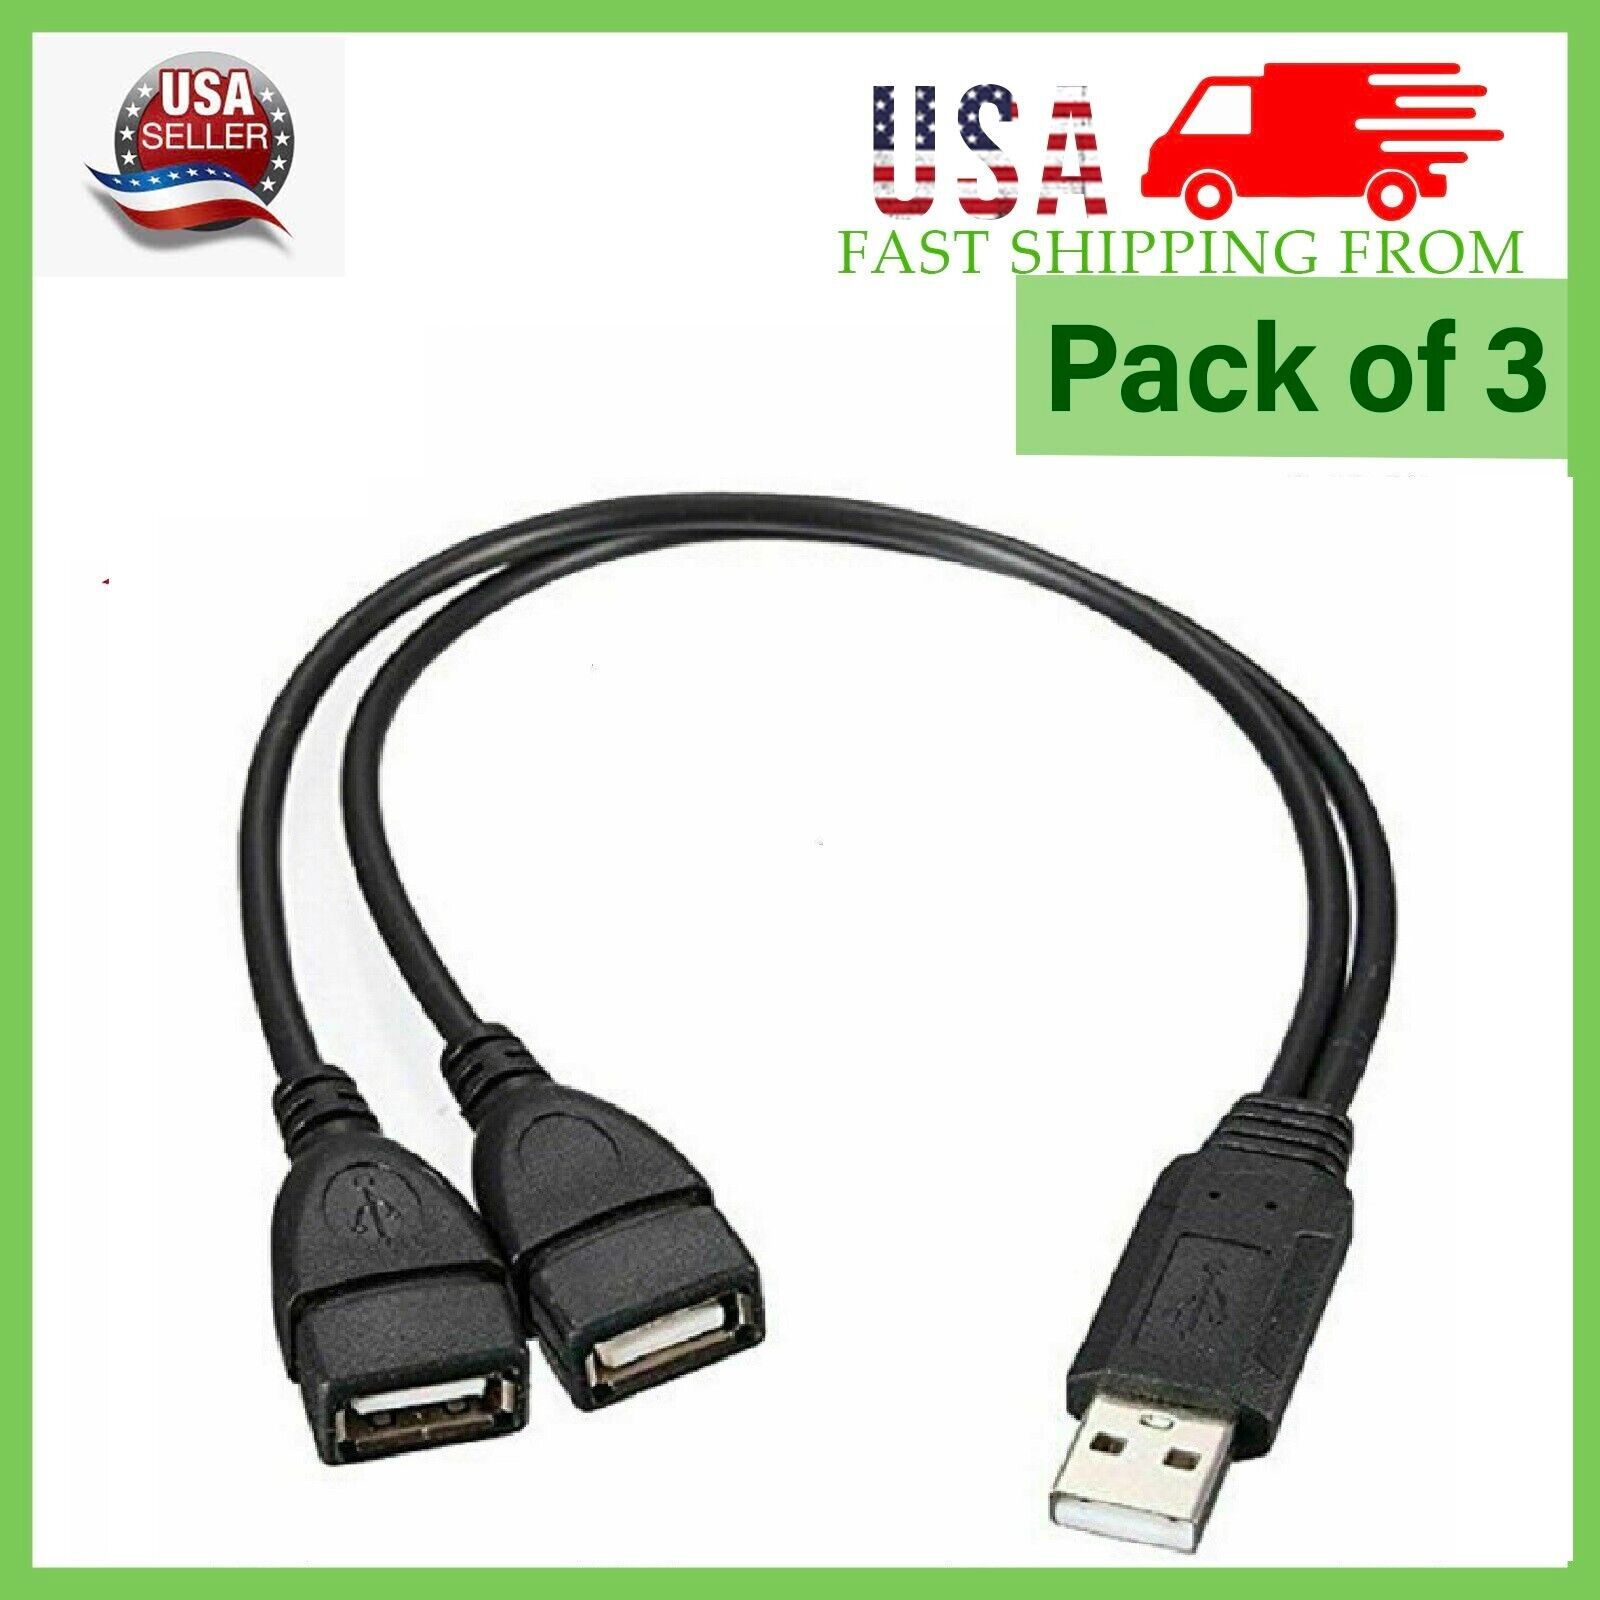 3 x USB 2.0 A Male To 2 Dual USB Female Jack Y Splitter Hub Cord Adapter Cable